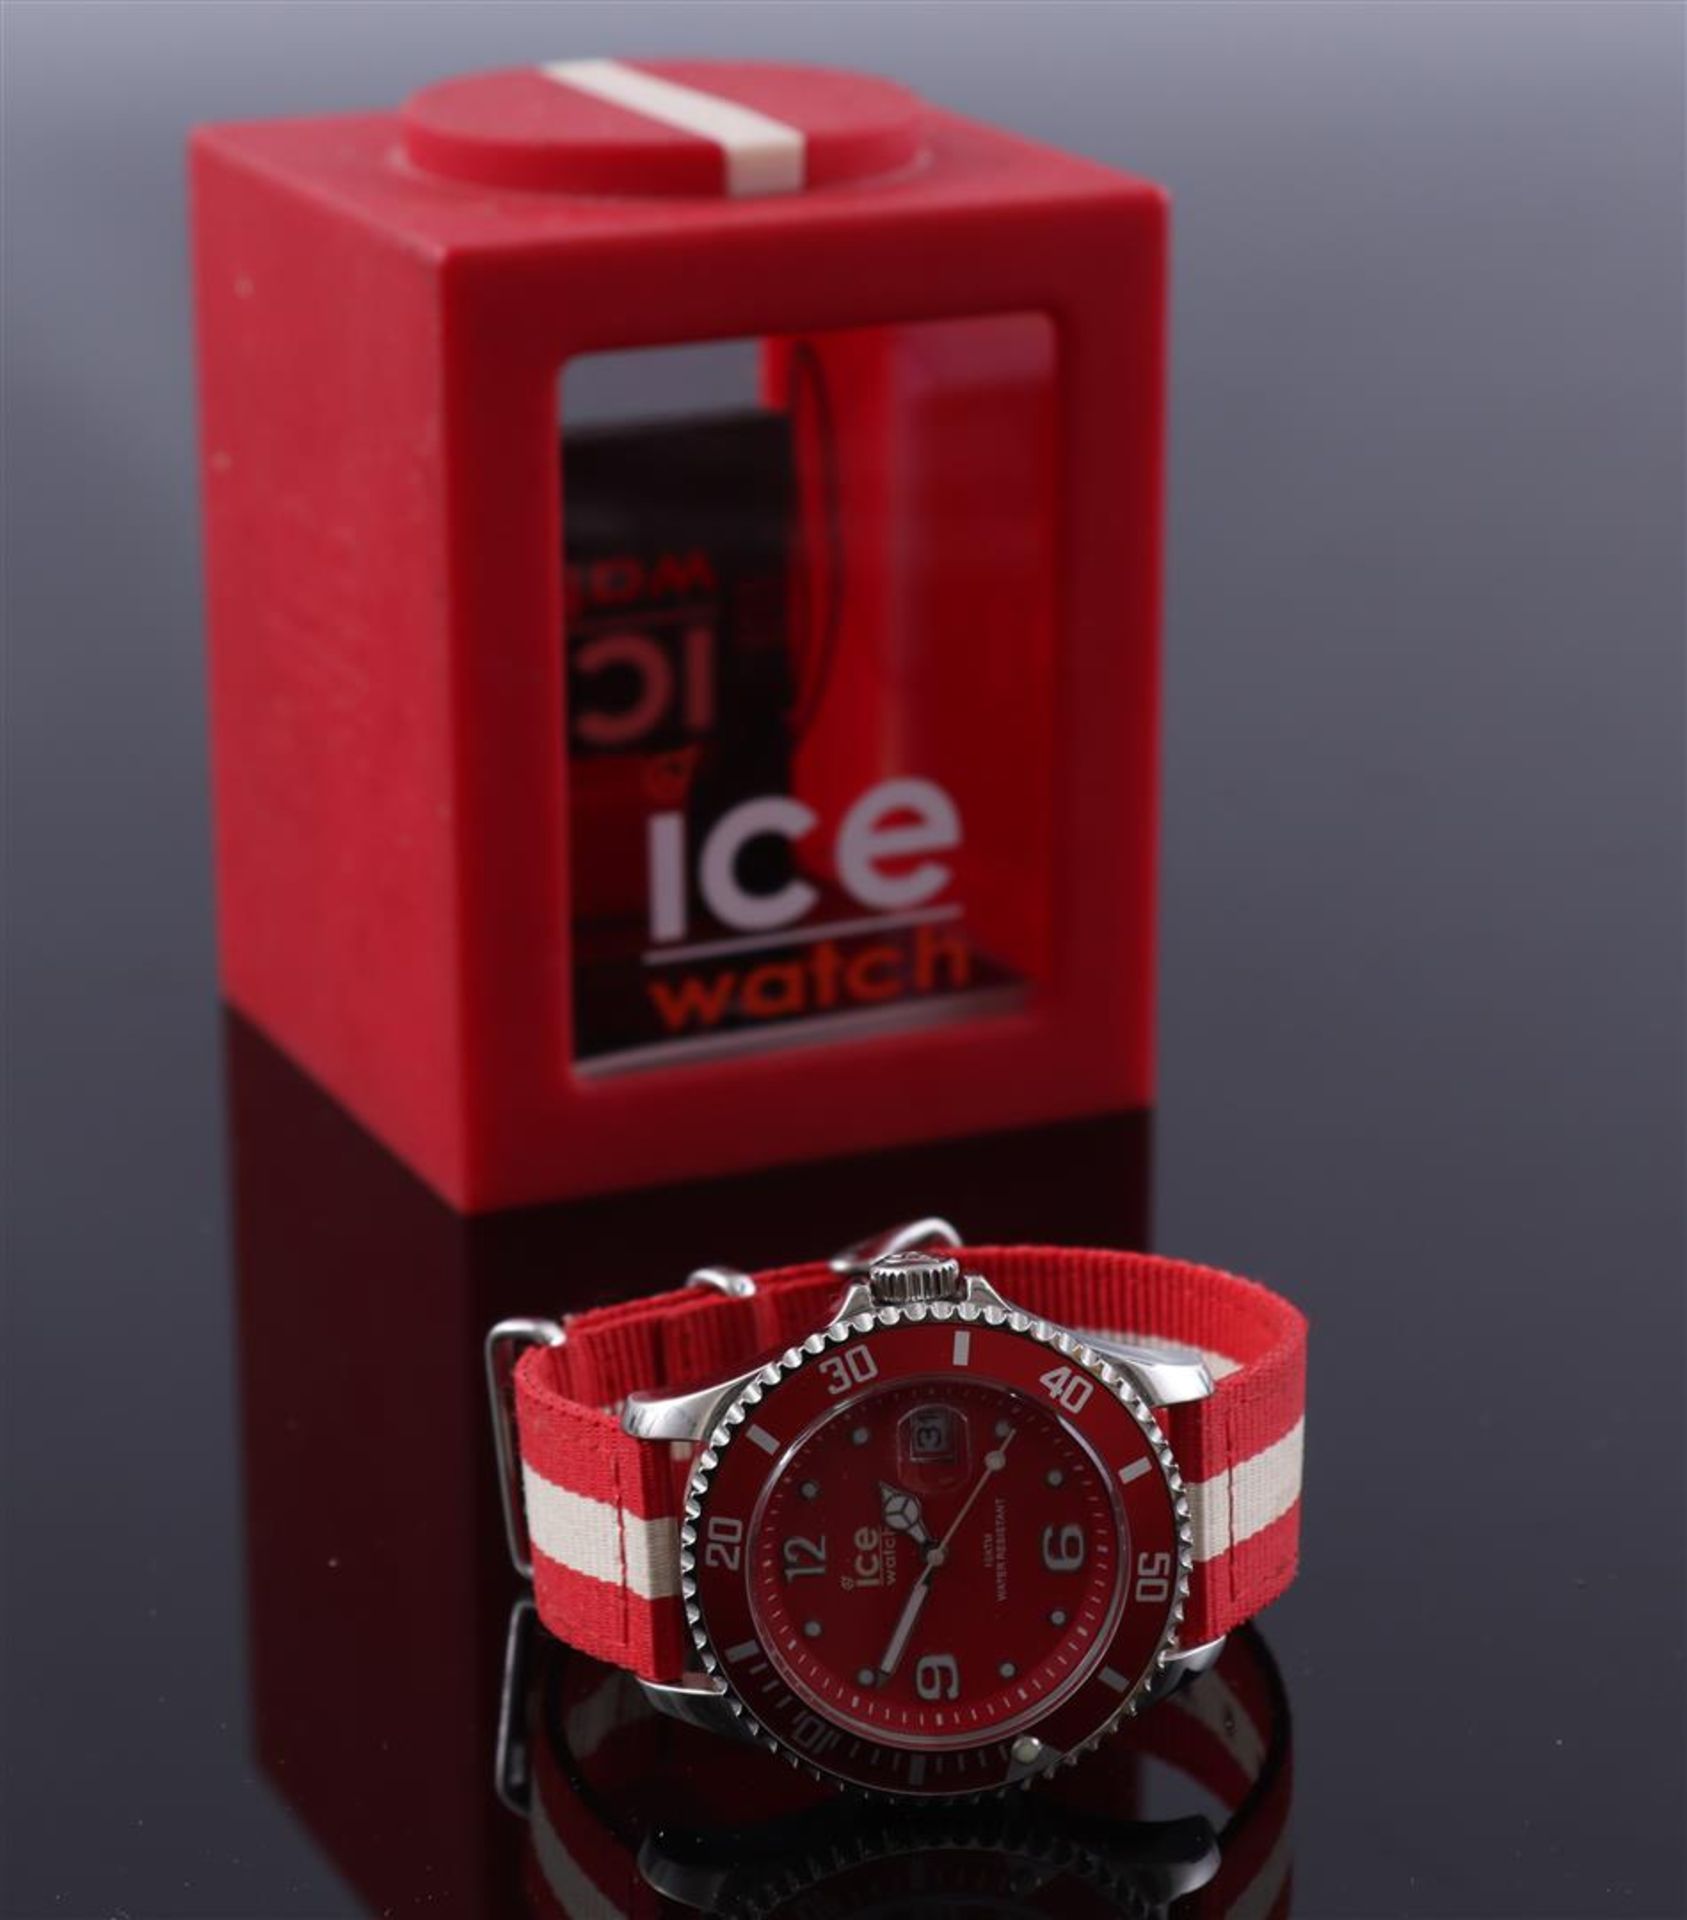 Ice Watch in box